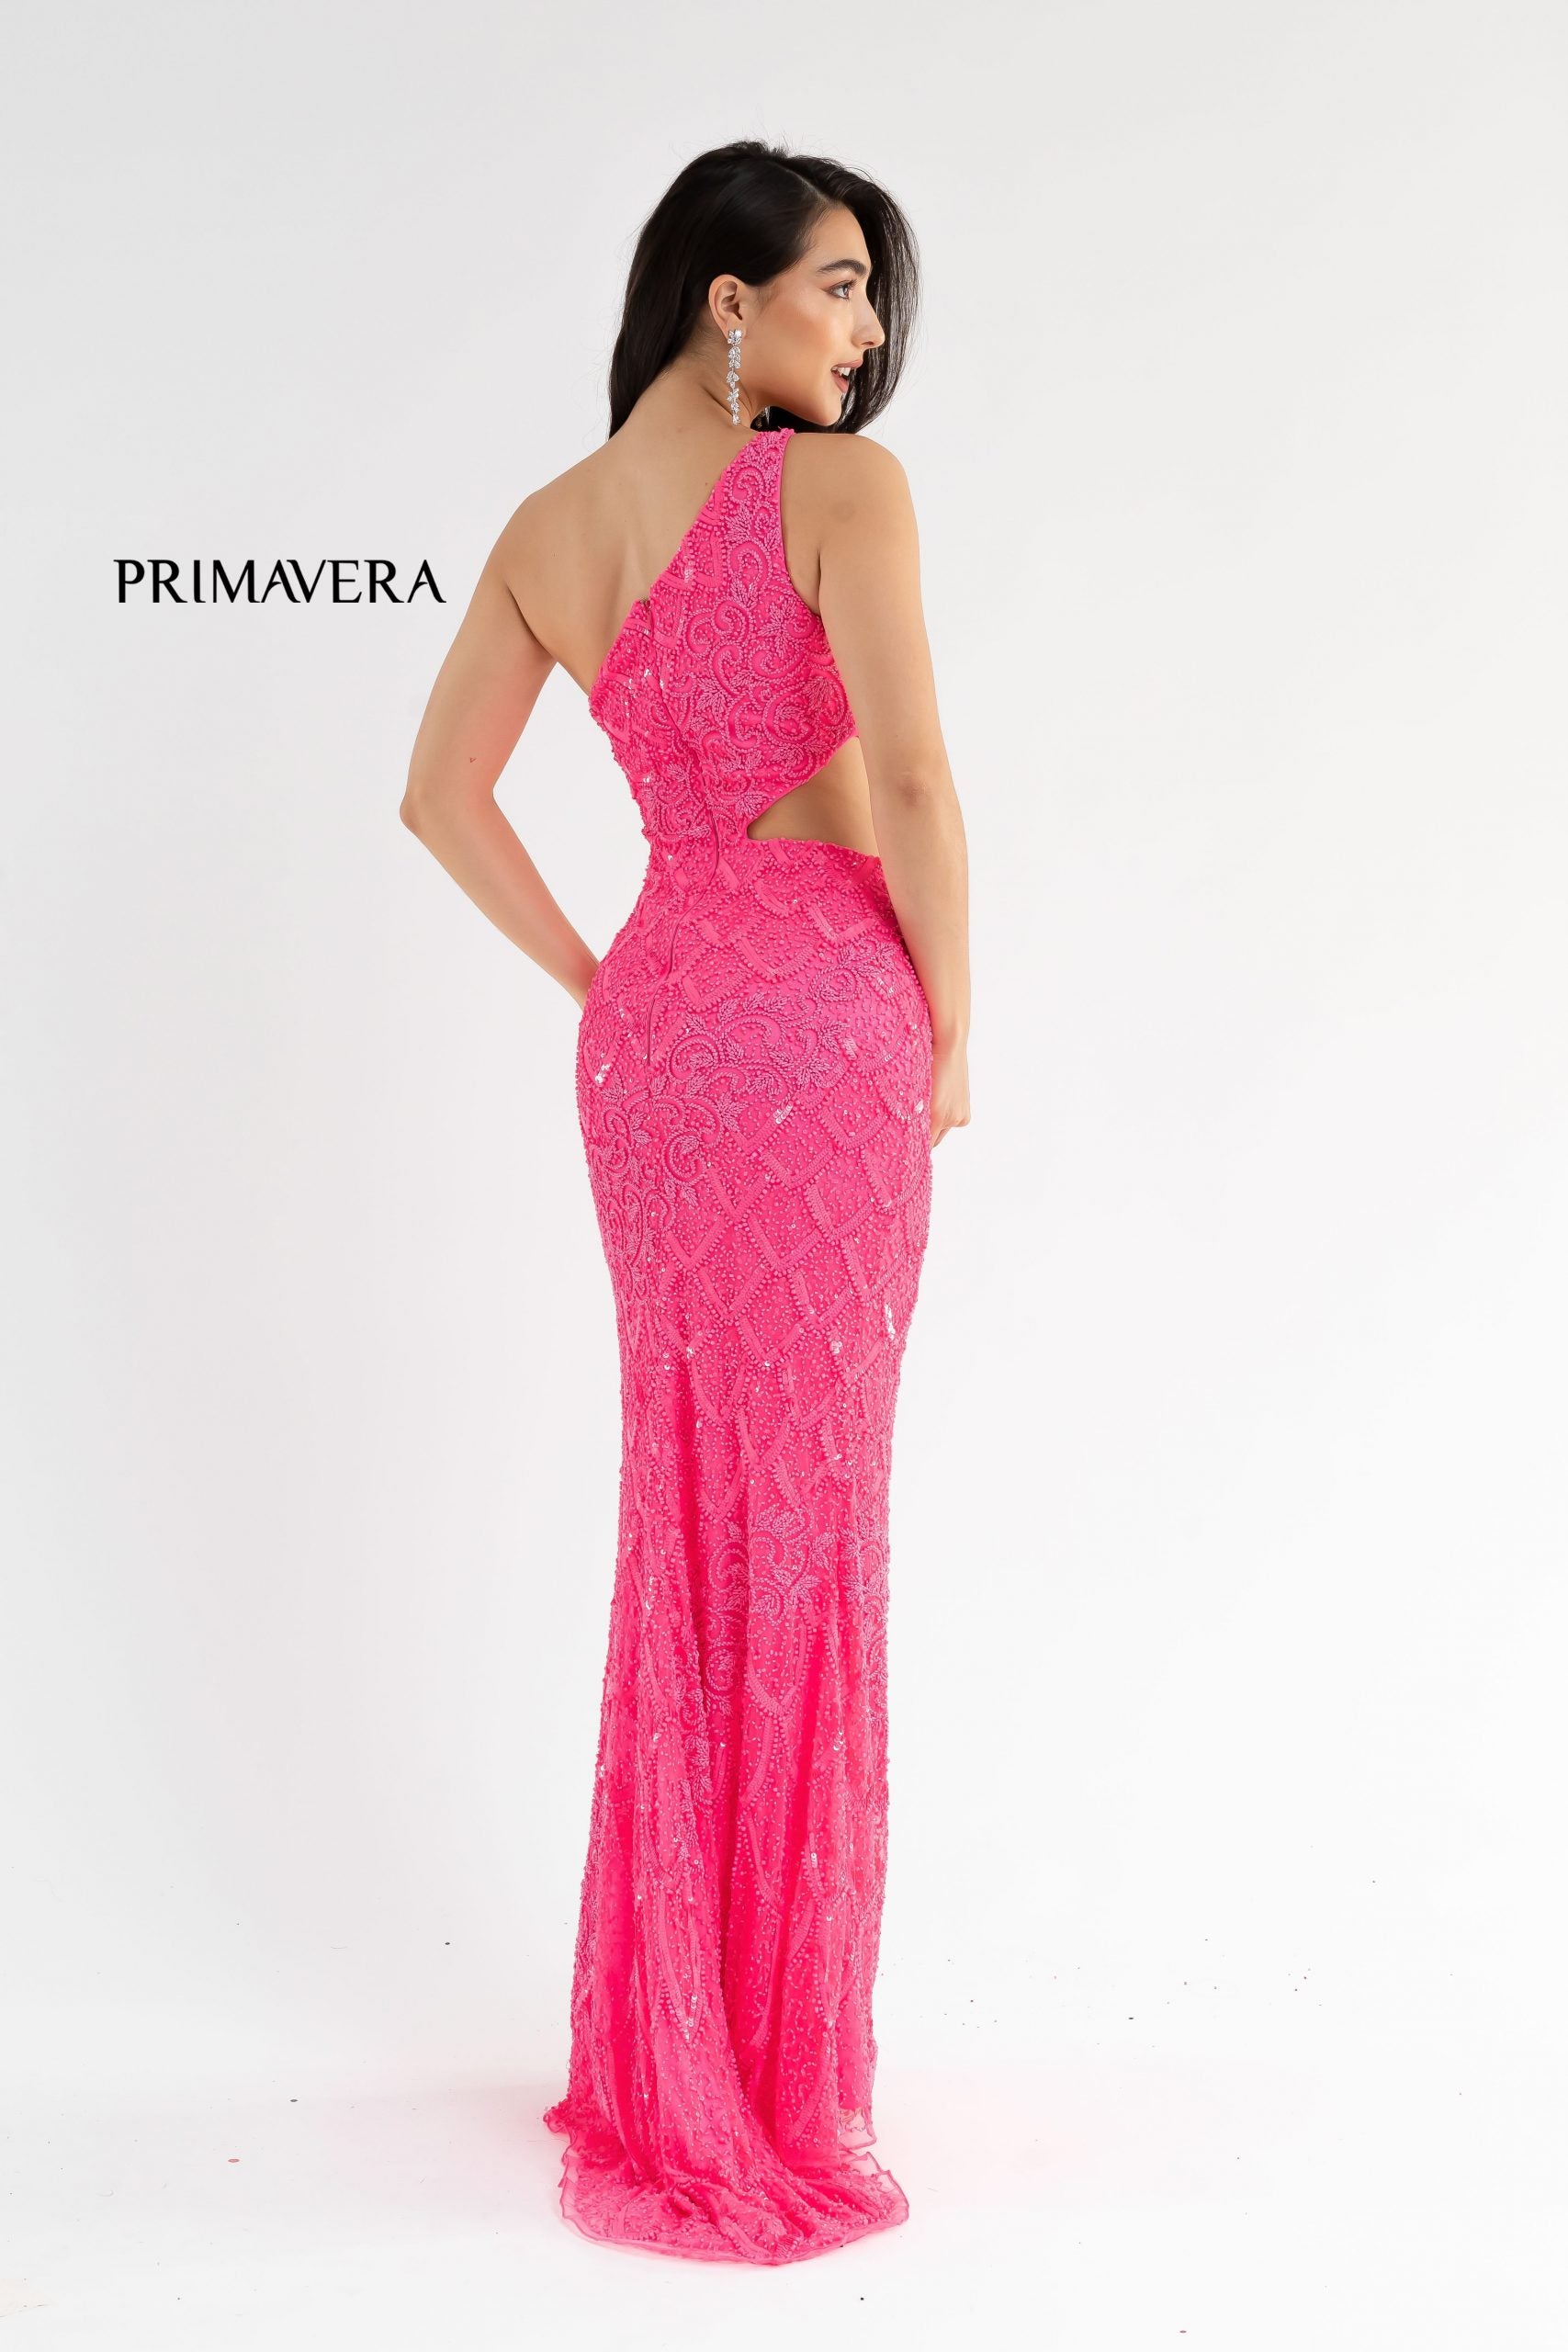 Primavera Couture 3729 This iridescent prom dress is sure to stand out in a crowd.  With its one shoulder design and side cutout, it makes an excellent choice for prom.  It ends with a slit and sweeping train.  Colors:  NEON PINK, NEON CORAL, SAGE GREEN, LIGHT TURQUOISE, BRIGHT BLUE, ORANGE, EMERALD, PURPLE, ROYAL BLUE, PINK, RASPBERRY, IVORY, GOLD, CHARCOAL, BLACK, RED  Sizes:  000, 00, 0, 2, 4, 6, 8, 10, 12, 14, 16, 18